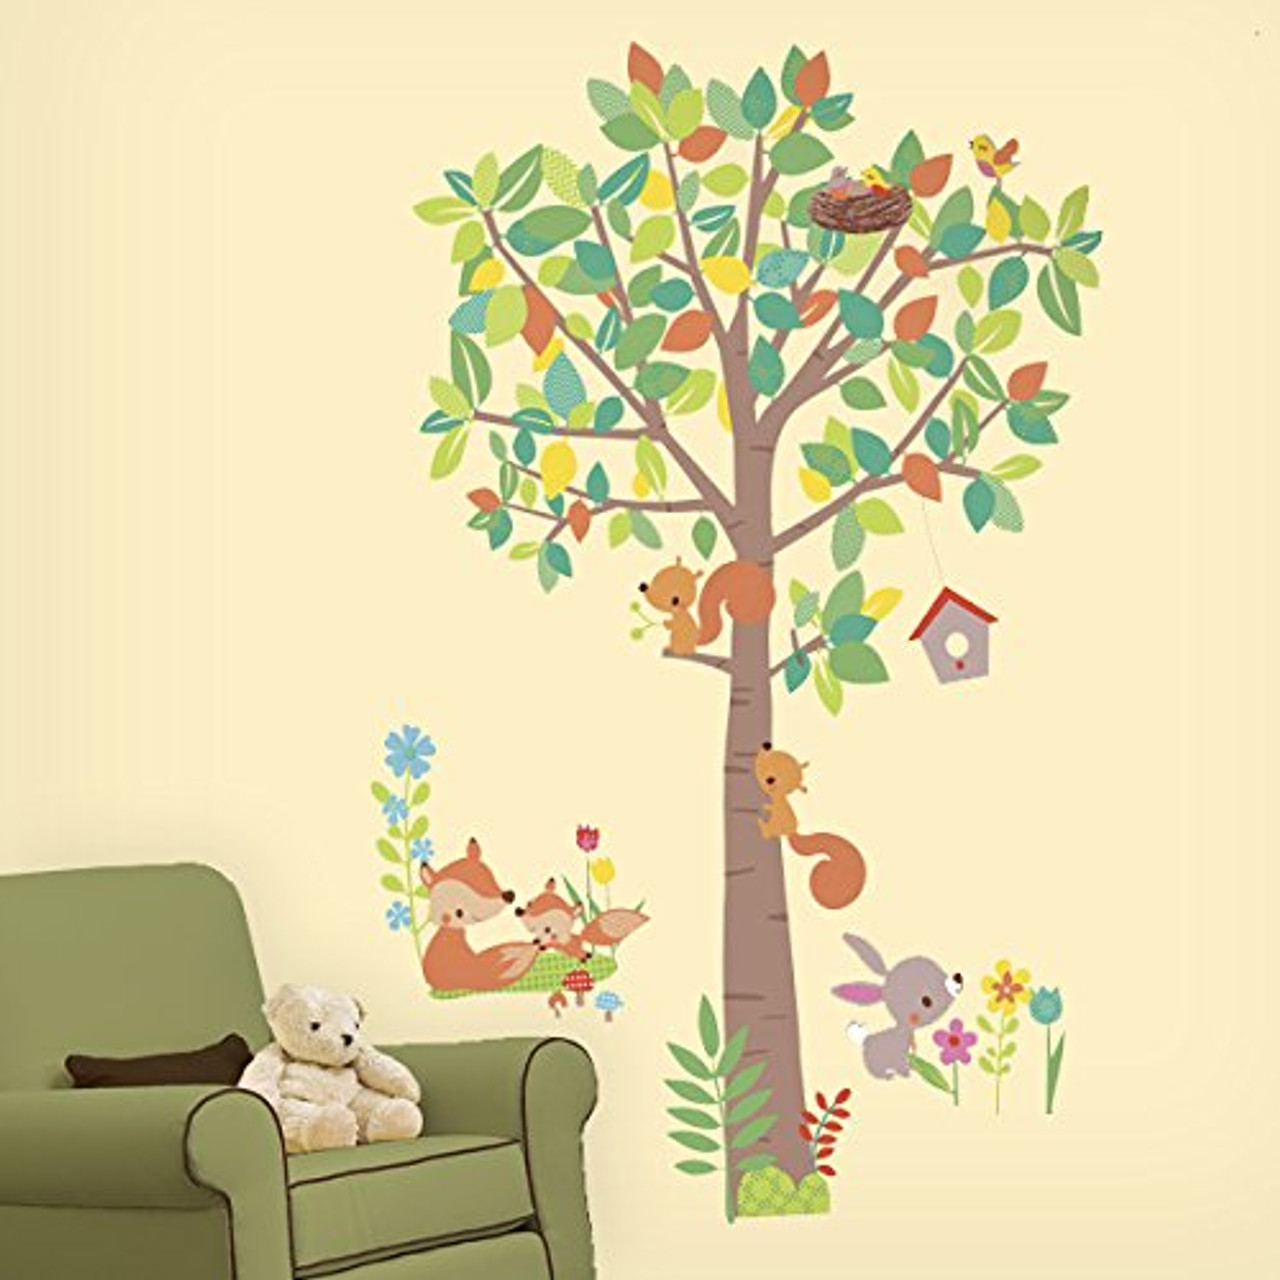 Giant Tree and Woodland Animals Wall Stickers | Roommates